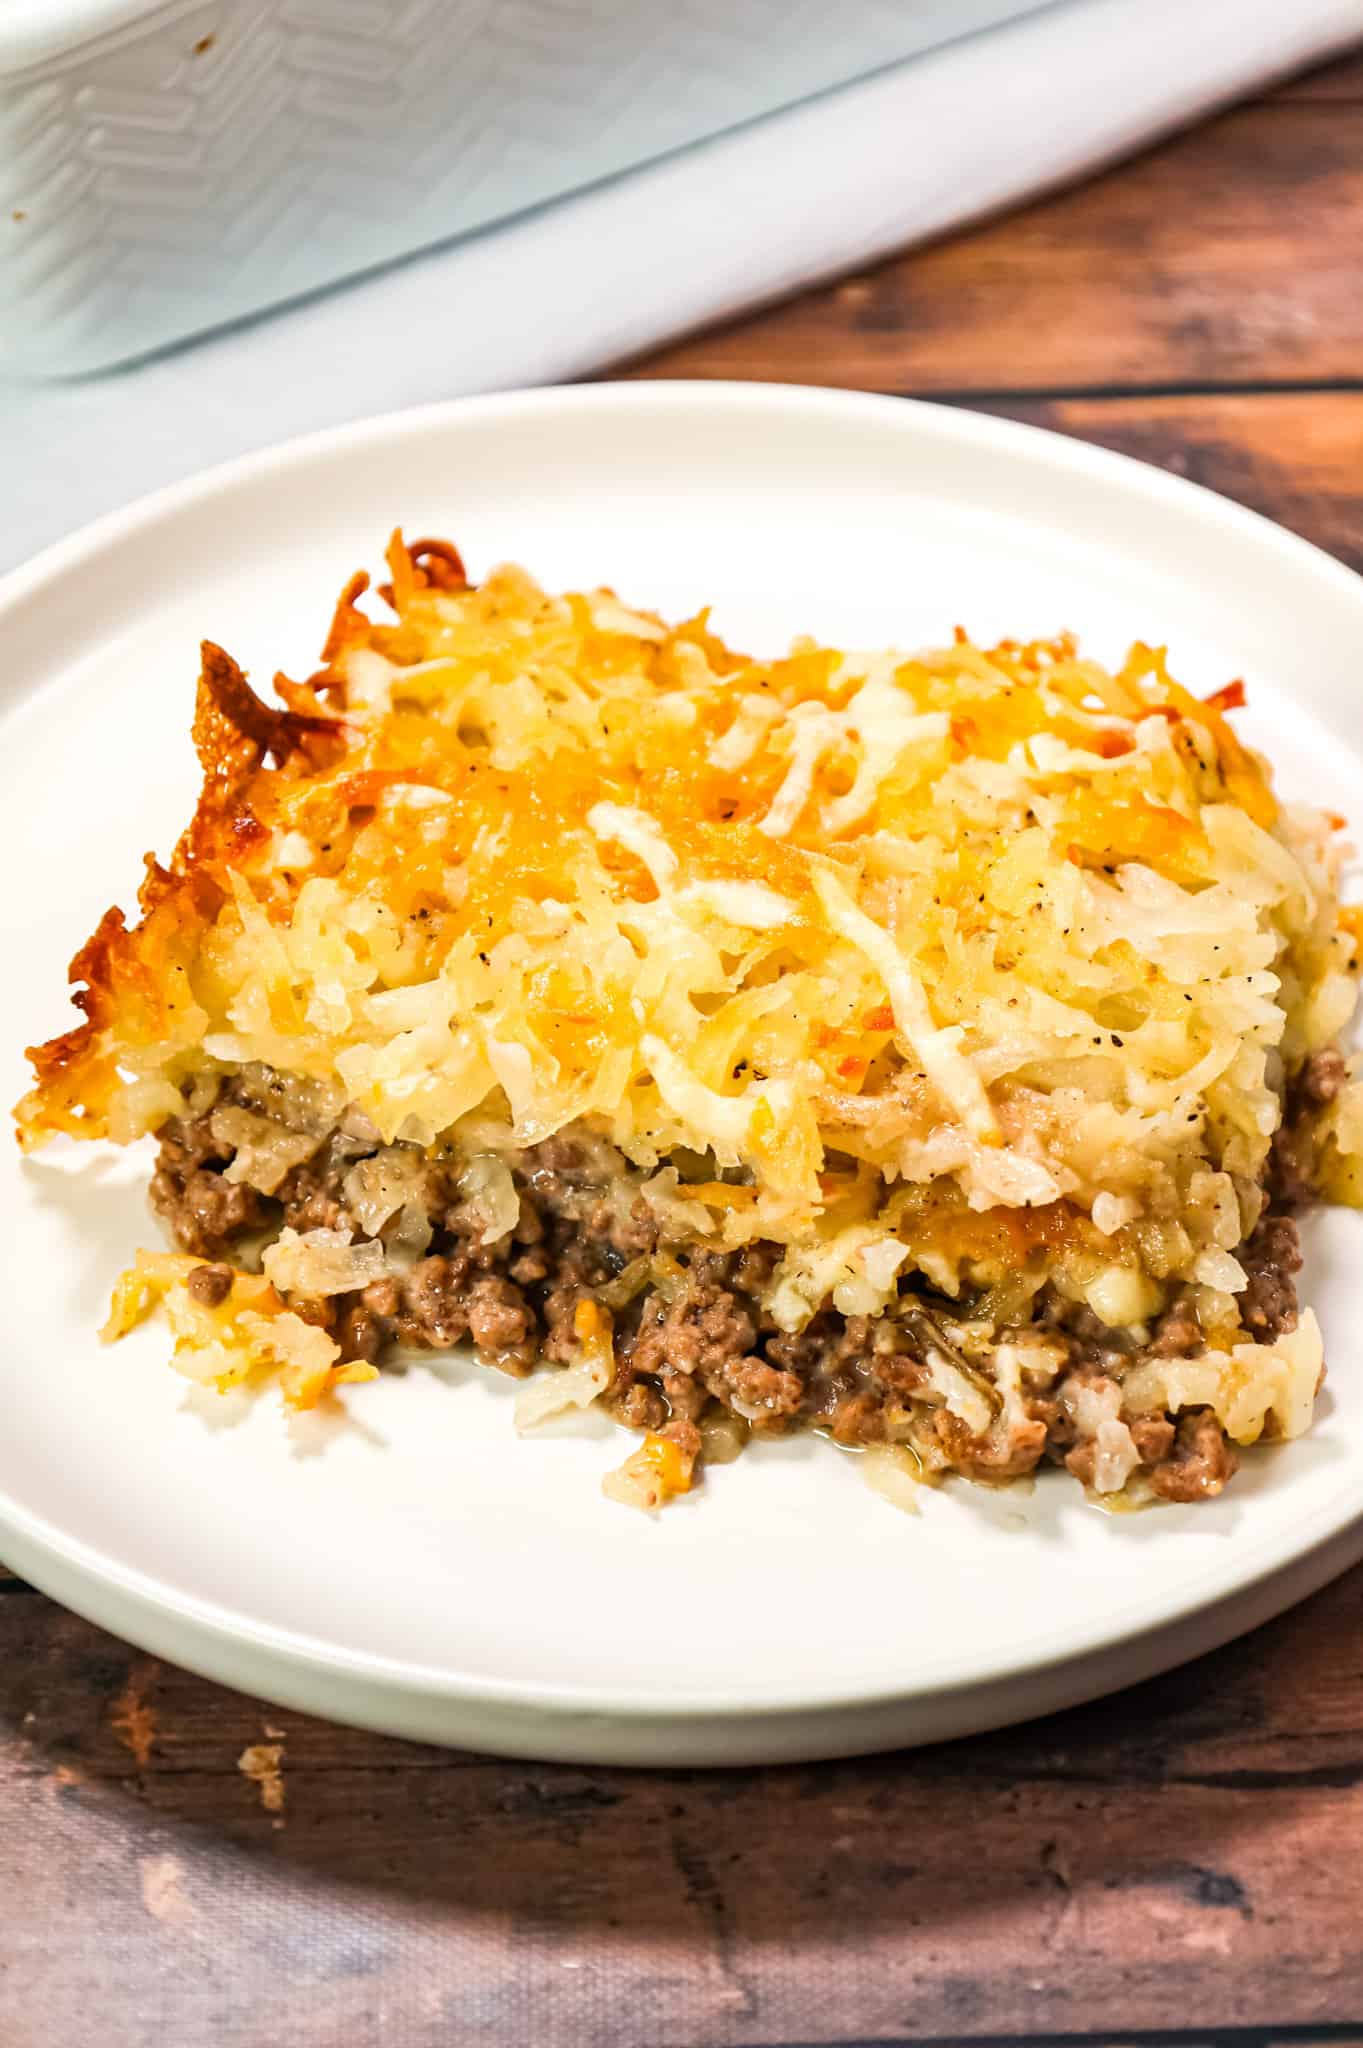 Hamburger Hashbrown Casserole is an easy ground beef dinner recipe loaded with shredded hashbrown potatoes, cream of mushroom soup and shredded mozzarella and cheddar cheese.